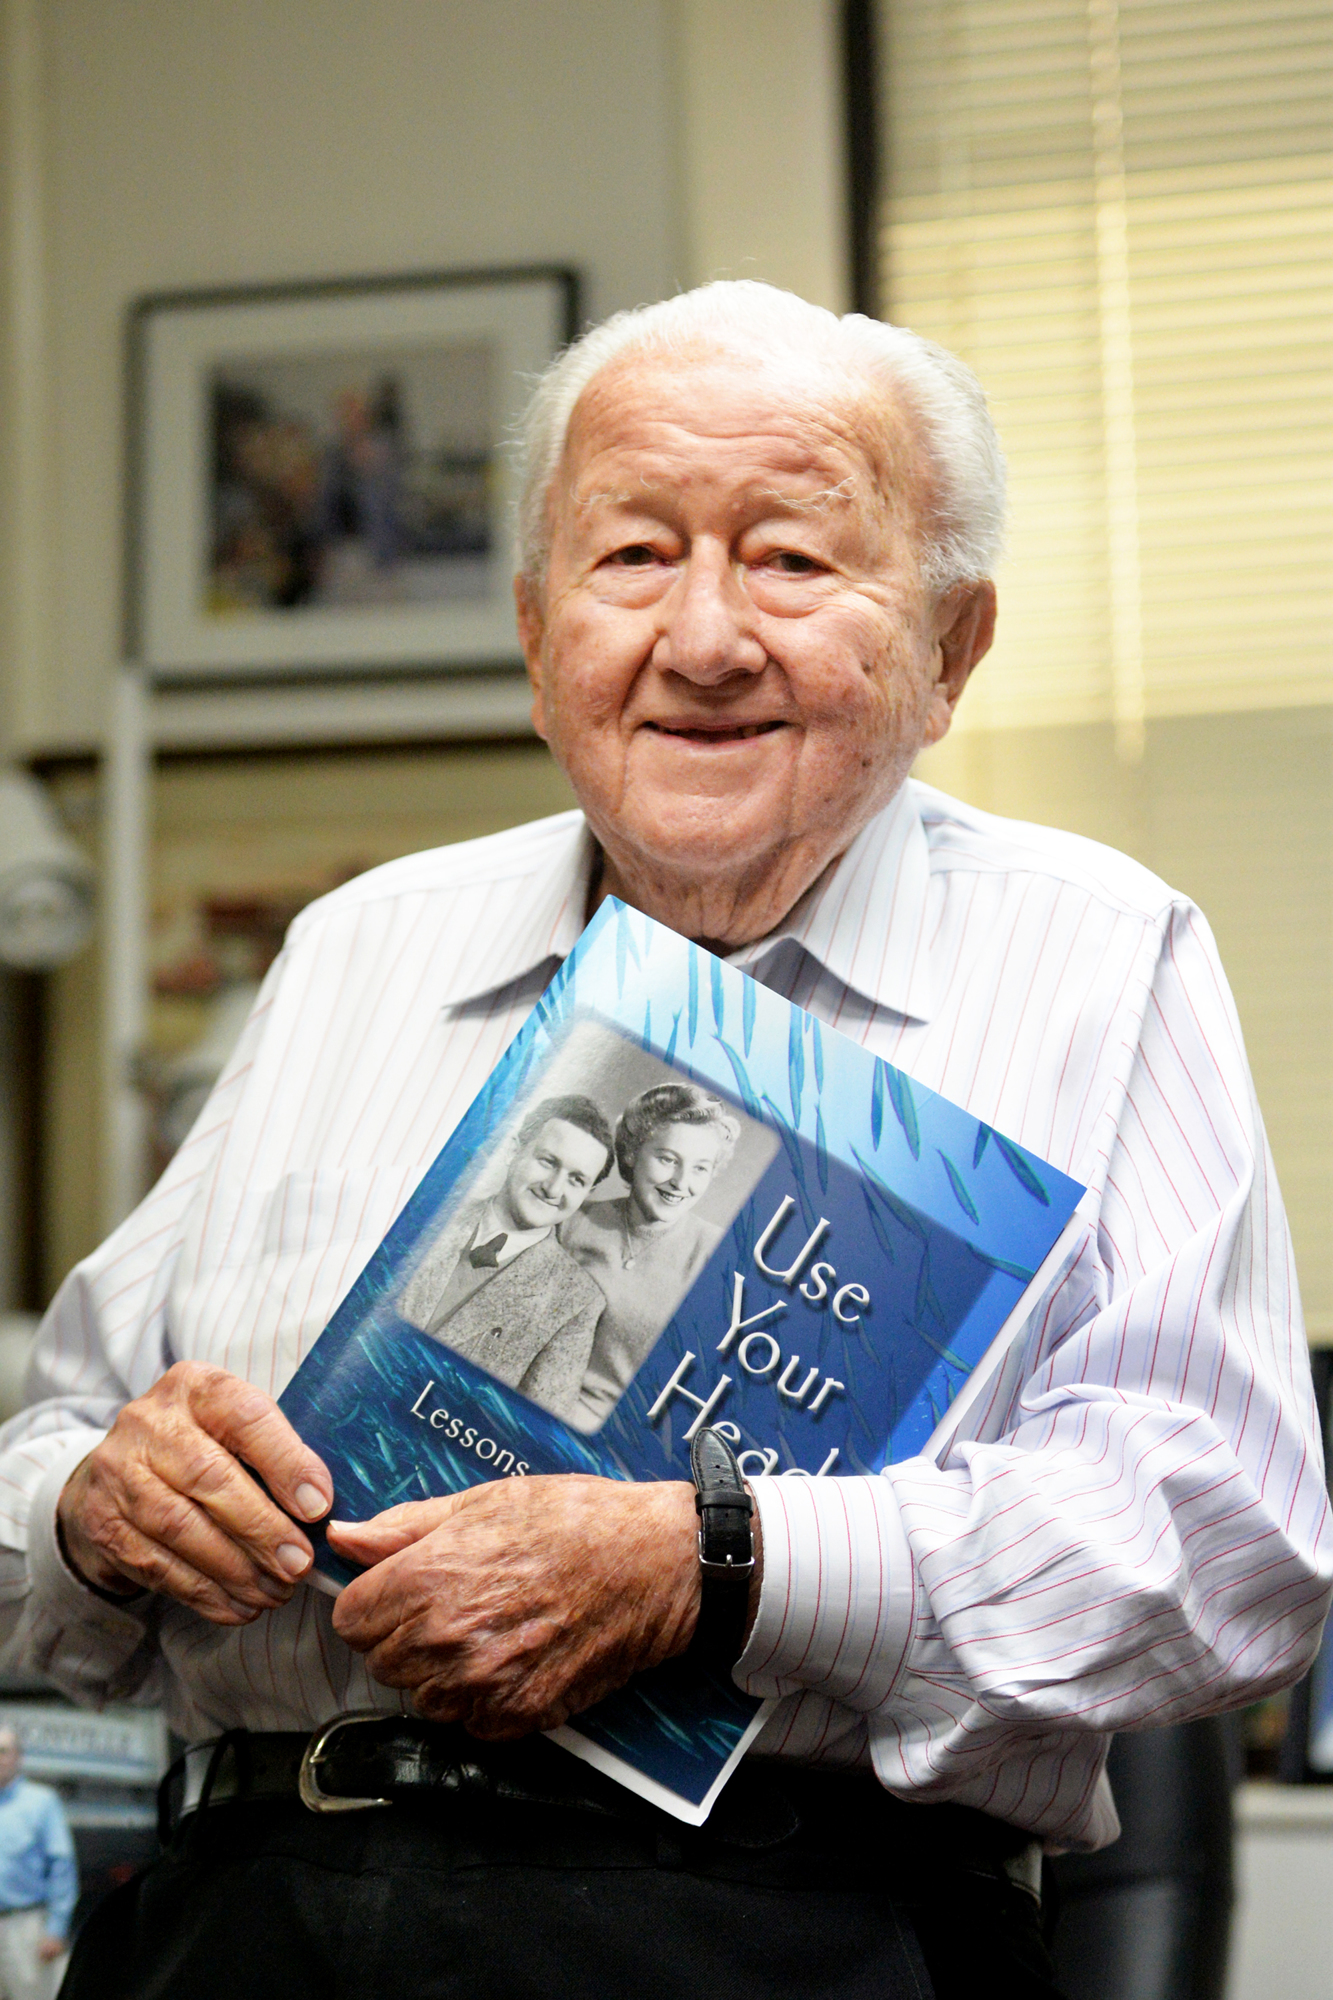 Beaver Street Fisheries Inc. Chairman Harry Frisch holds his 2018 biography, “Use Your Head: Lessons of a Lifetime.”